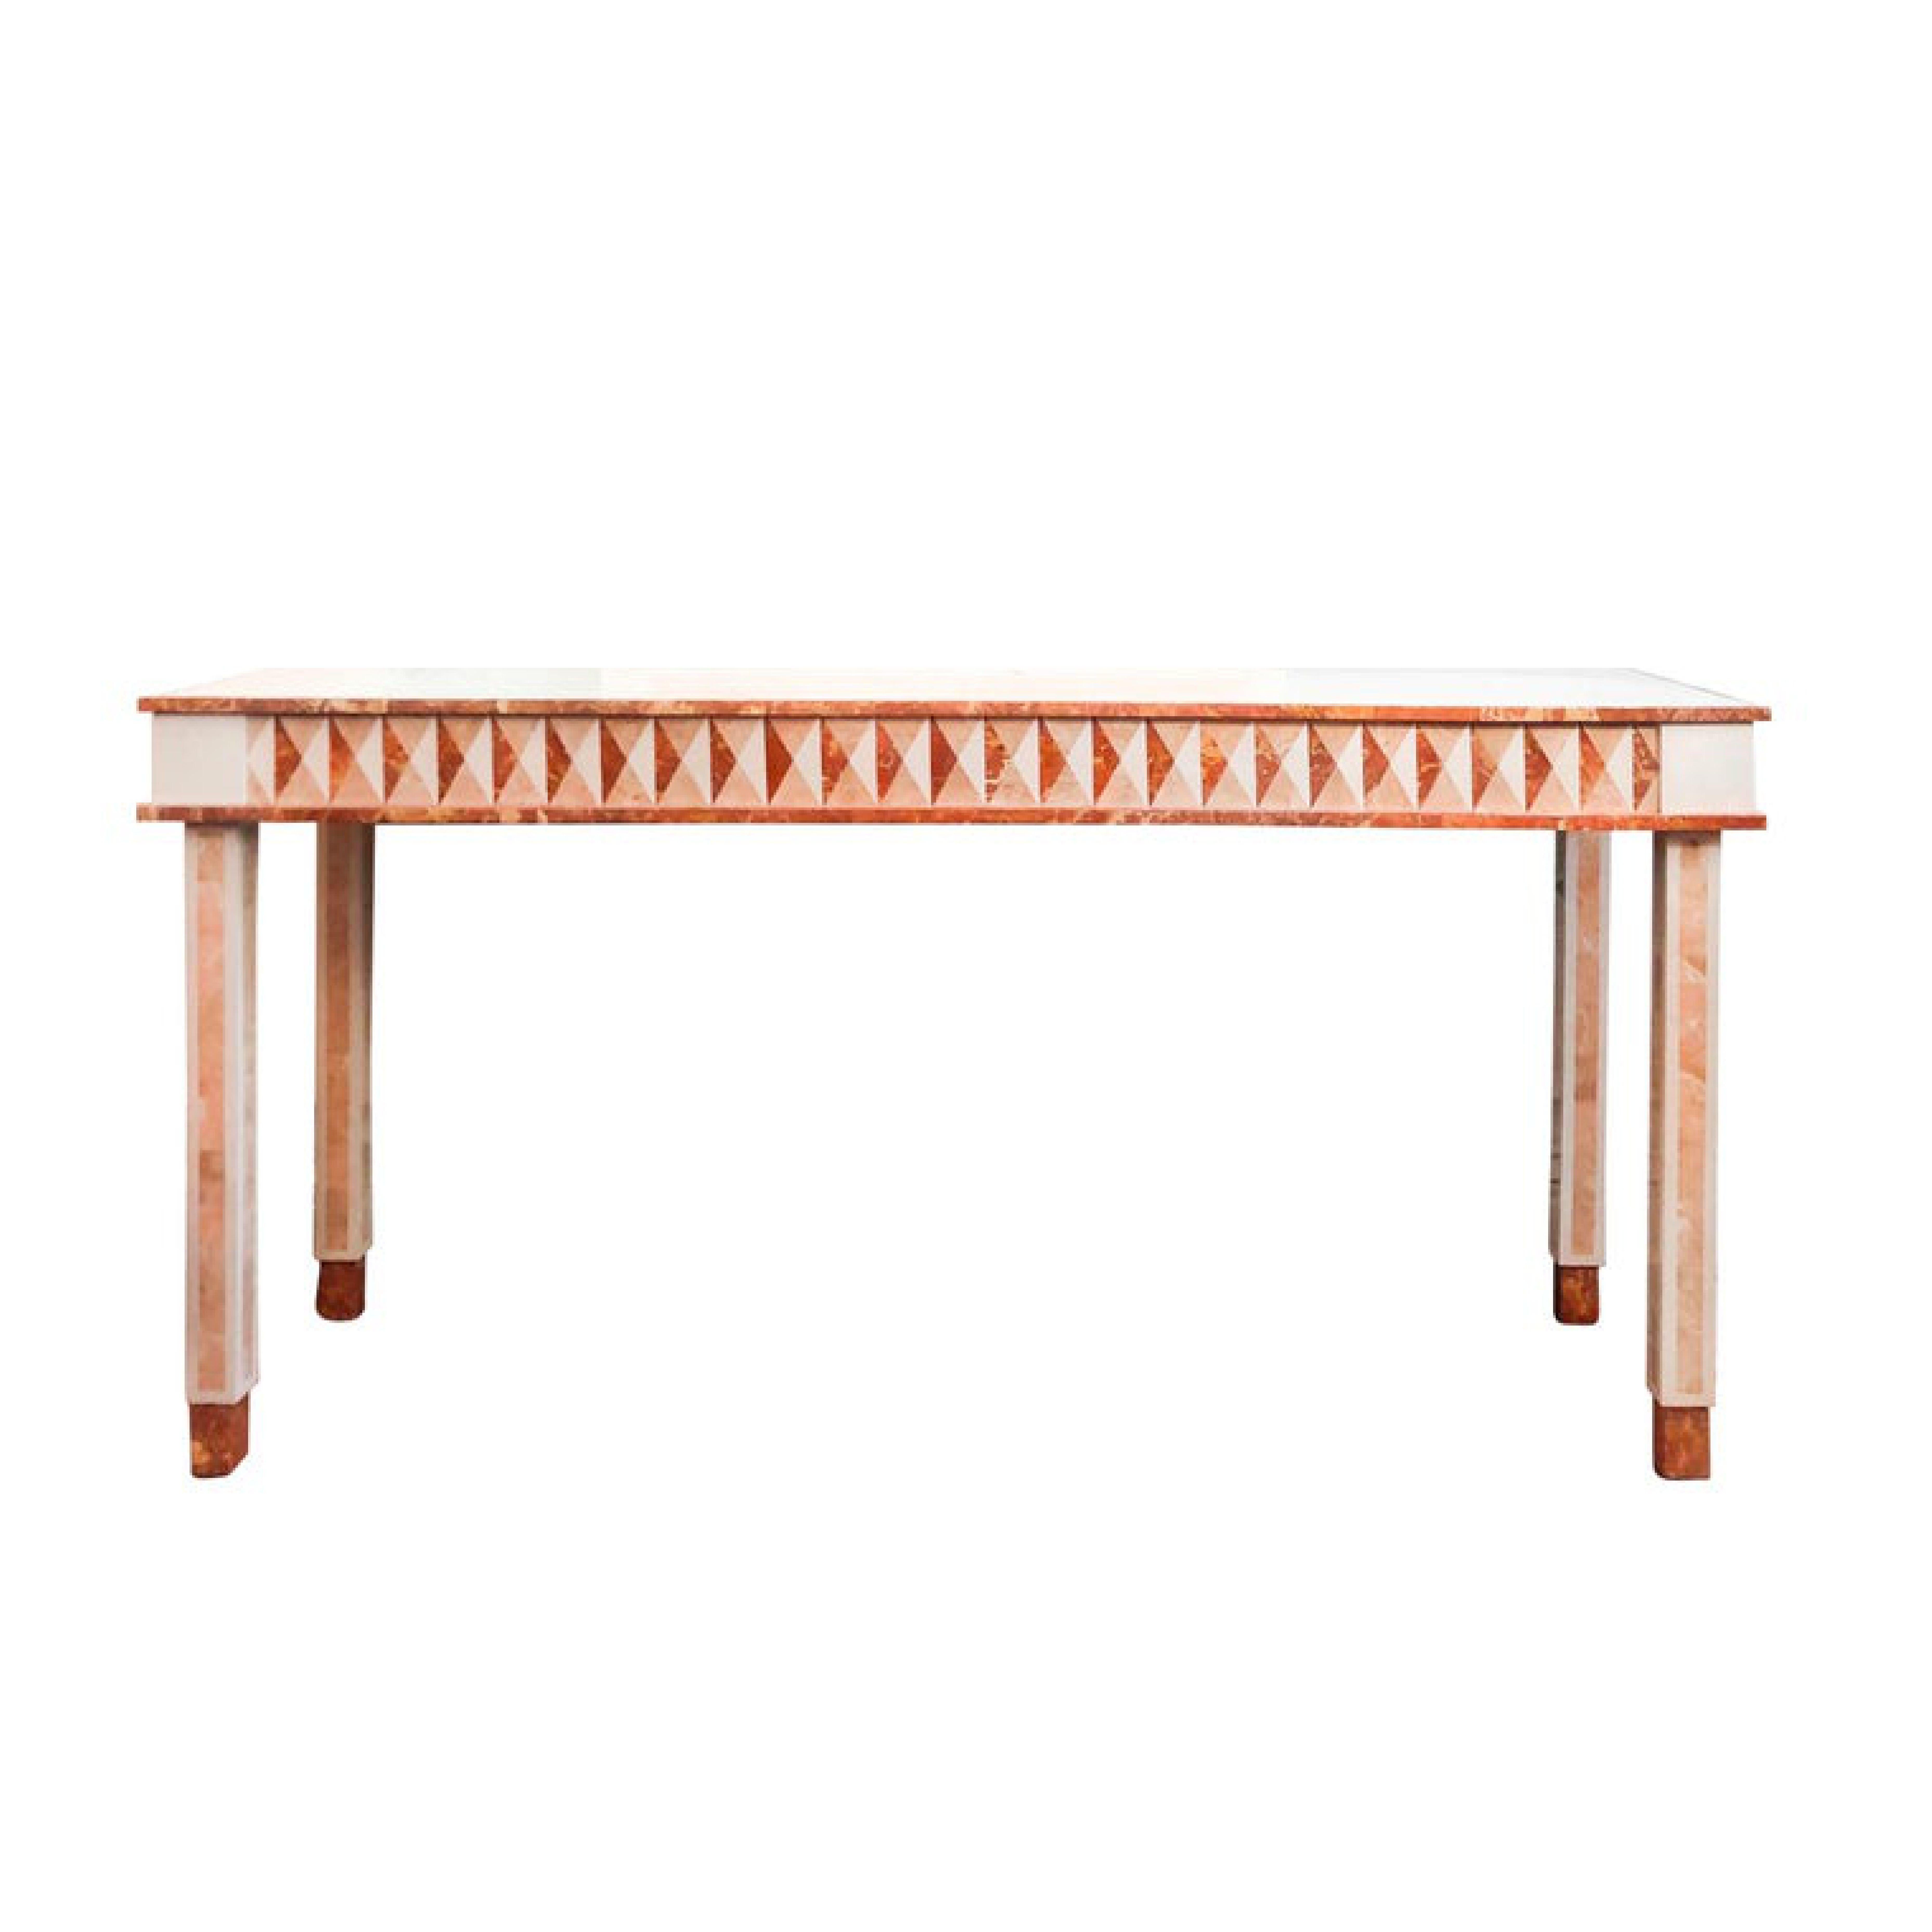 Vintage neoclassical Postmodern Maitland-Smith marble tessellated console table

Stunning tessellated marble console table and wall mirror set by Maitland Smith. Lovely geometric pattern, juxtaposition of cream, red and coral pink marble.